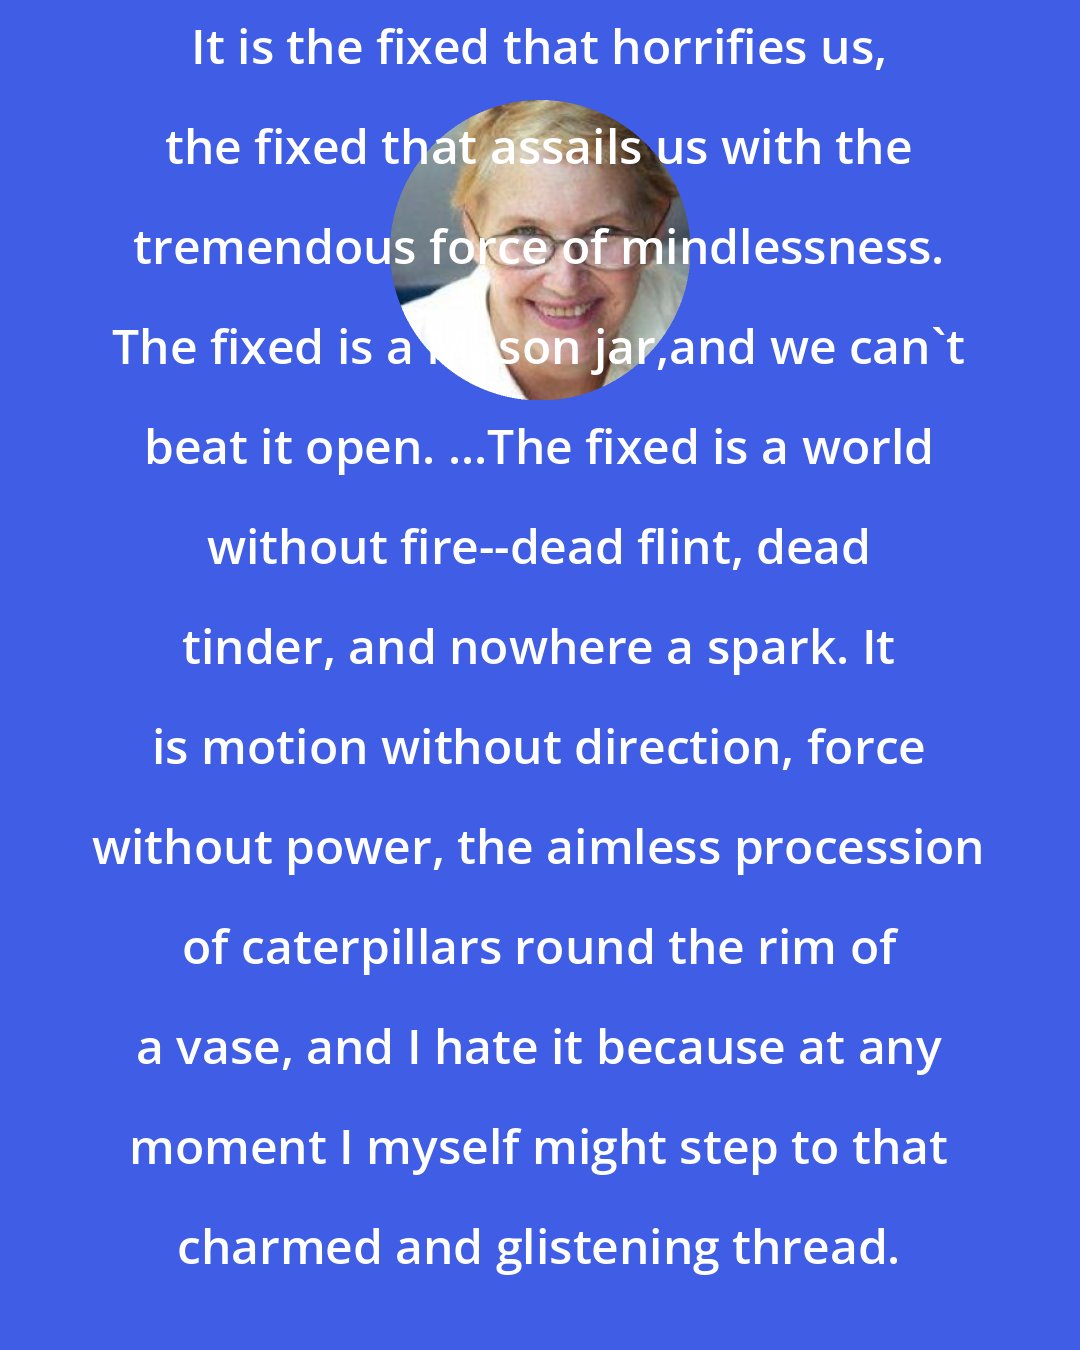 Annie Dillard: It is the fixed that horrifies us, the fixed that assails us with the tremendous force of mindlessness. The fixed is a Mason jar,and we can't beat it open. ...The fixed is a world without fire--dead flint, dead tinder, and nowhere a spark. It is motion without direction, force without power, the aimless procession of caterpillars round the rim of a vase, and I hate it because at any moment I myself might step to that charmed and glistening thread.